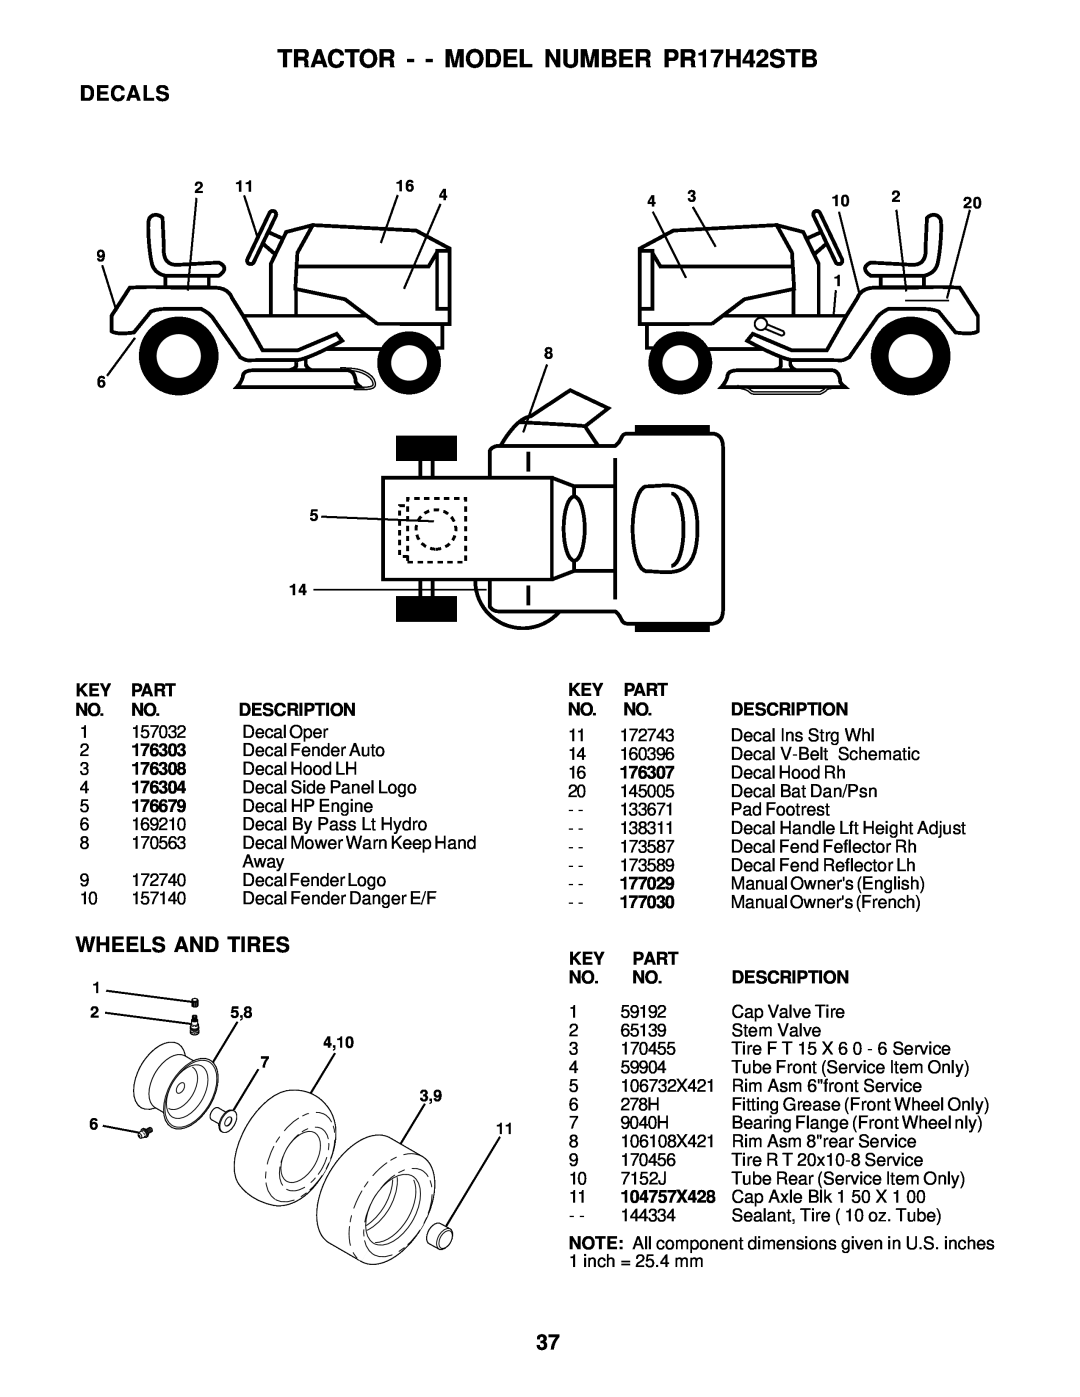 Poulan 177029 owner manual Decals, Wheels And Tires, TRACTOR - - MODEL NUMBER PR17H42STB 